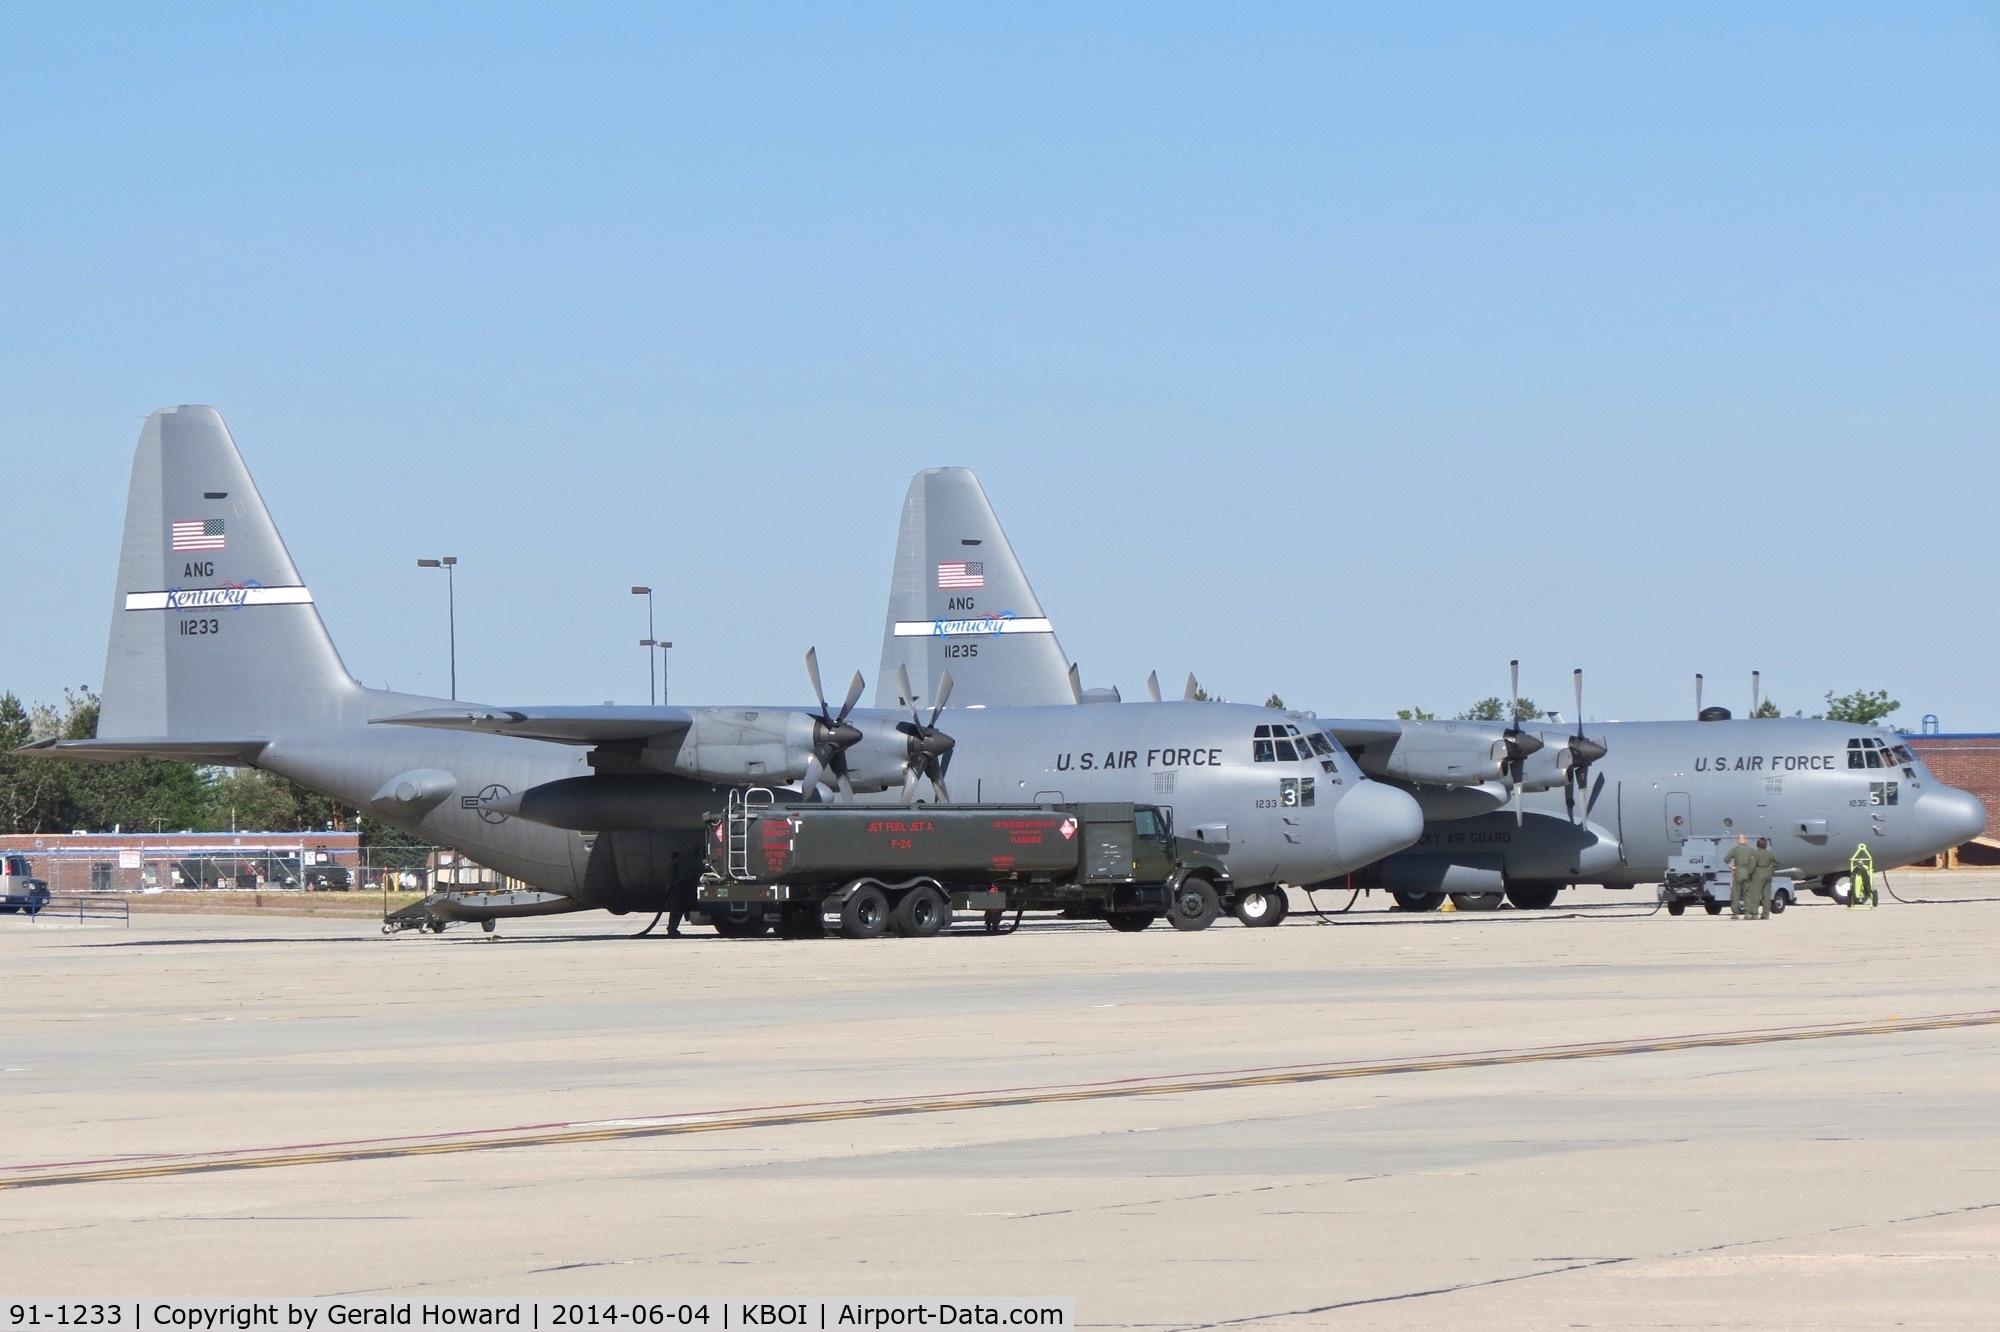 91-1233, 1991 Lockheed C-130H Hercules C/N 382-5283, 91-1233 along with 91-1235 from the 123rd Airlift Wing, Kentucky ANG on the Idaho ANG ramp.